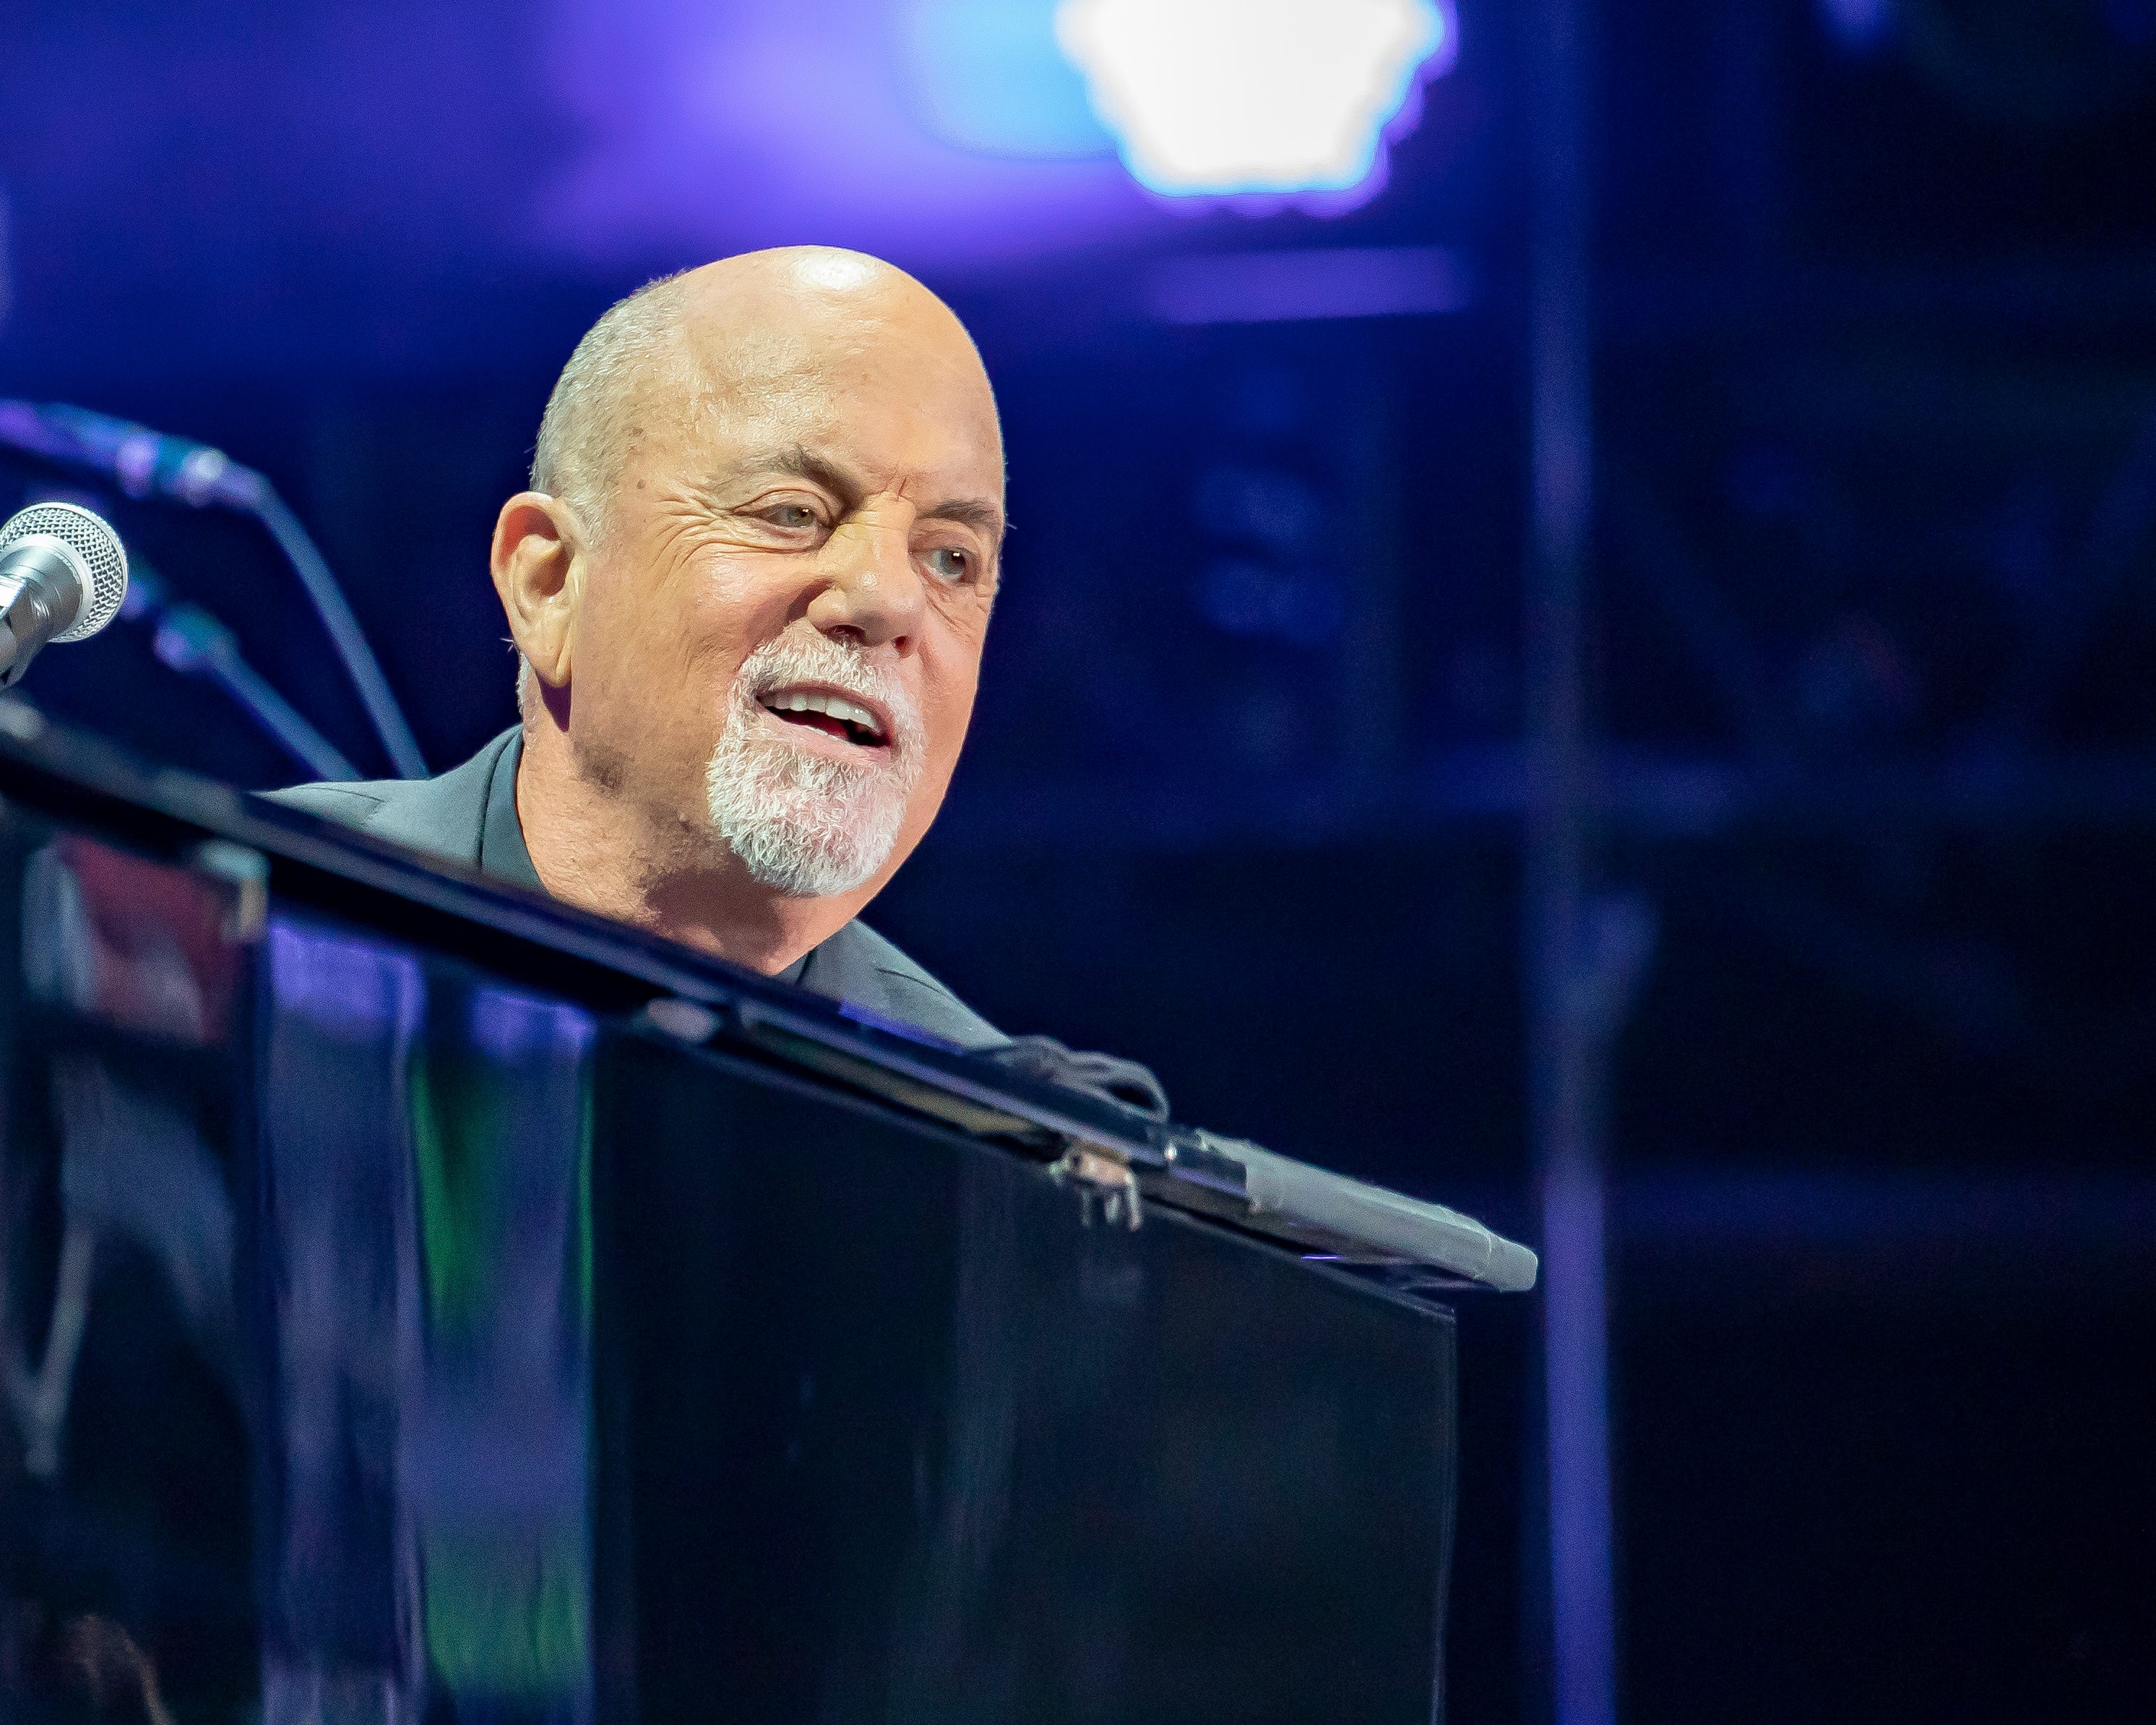 Billy Joel performs at Comerica Park in Detroit.